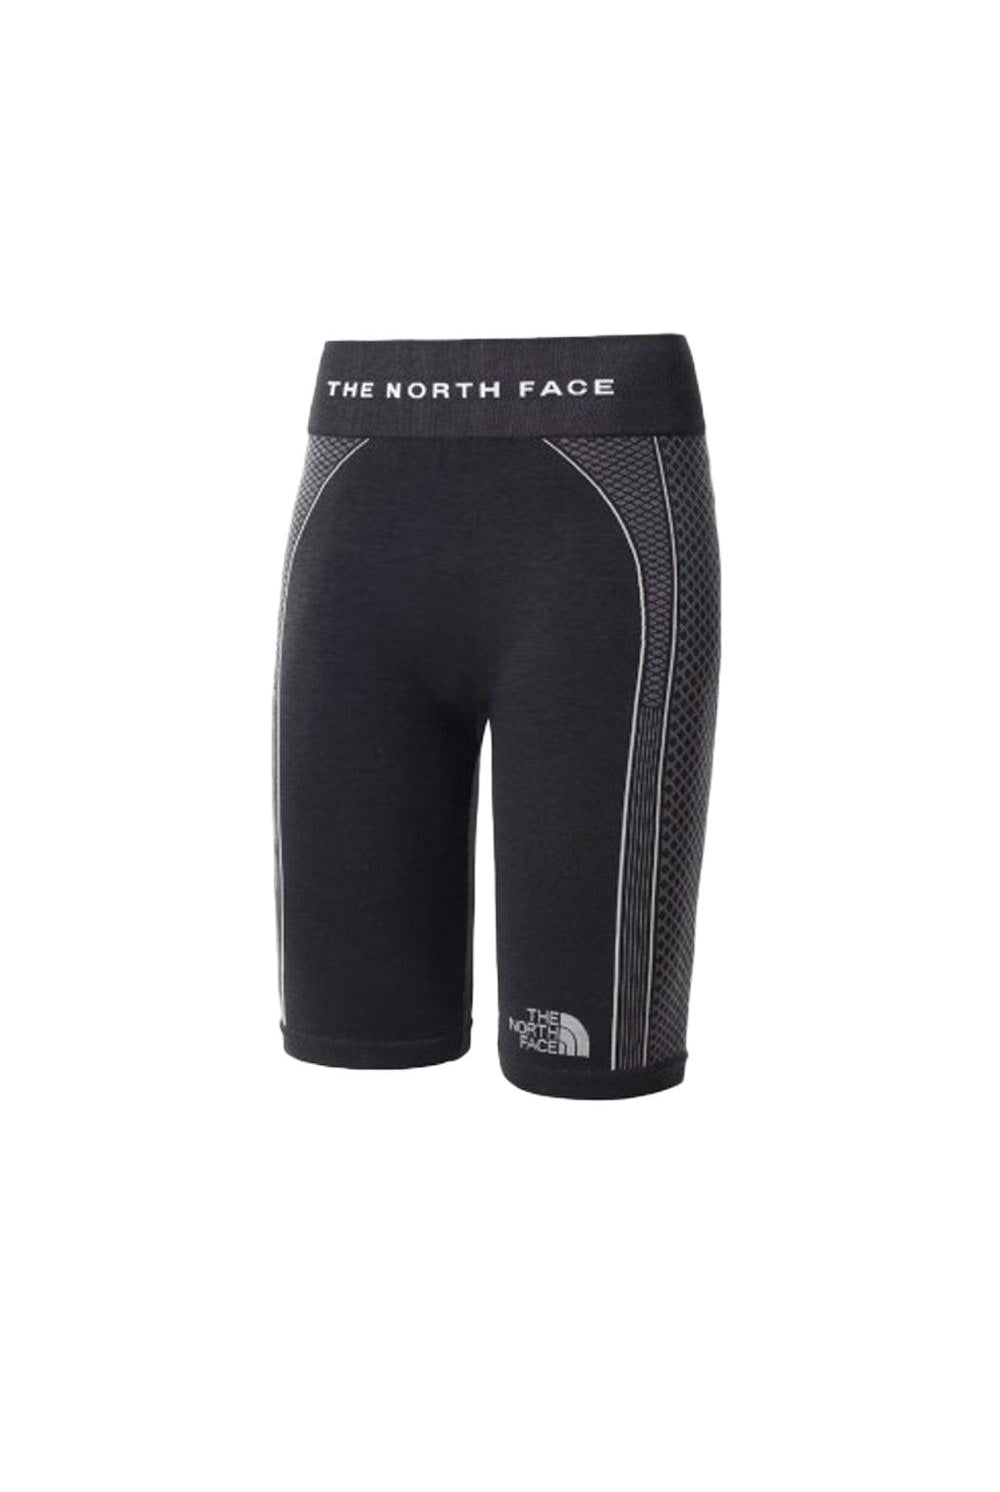 The North Face | Baselayer Bottom Black | Milagron